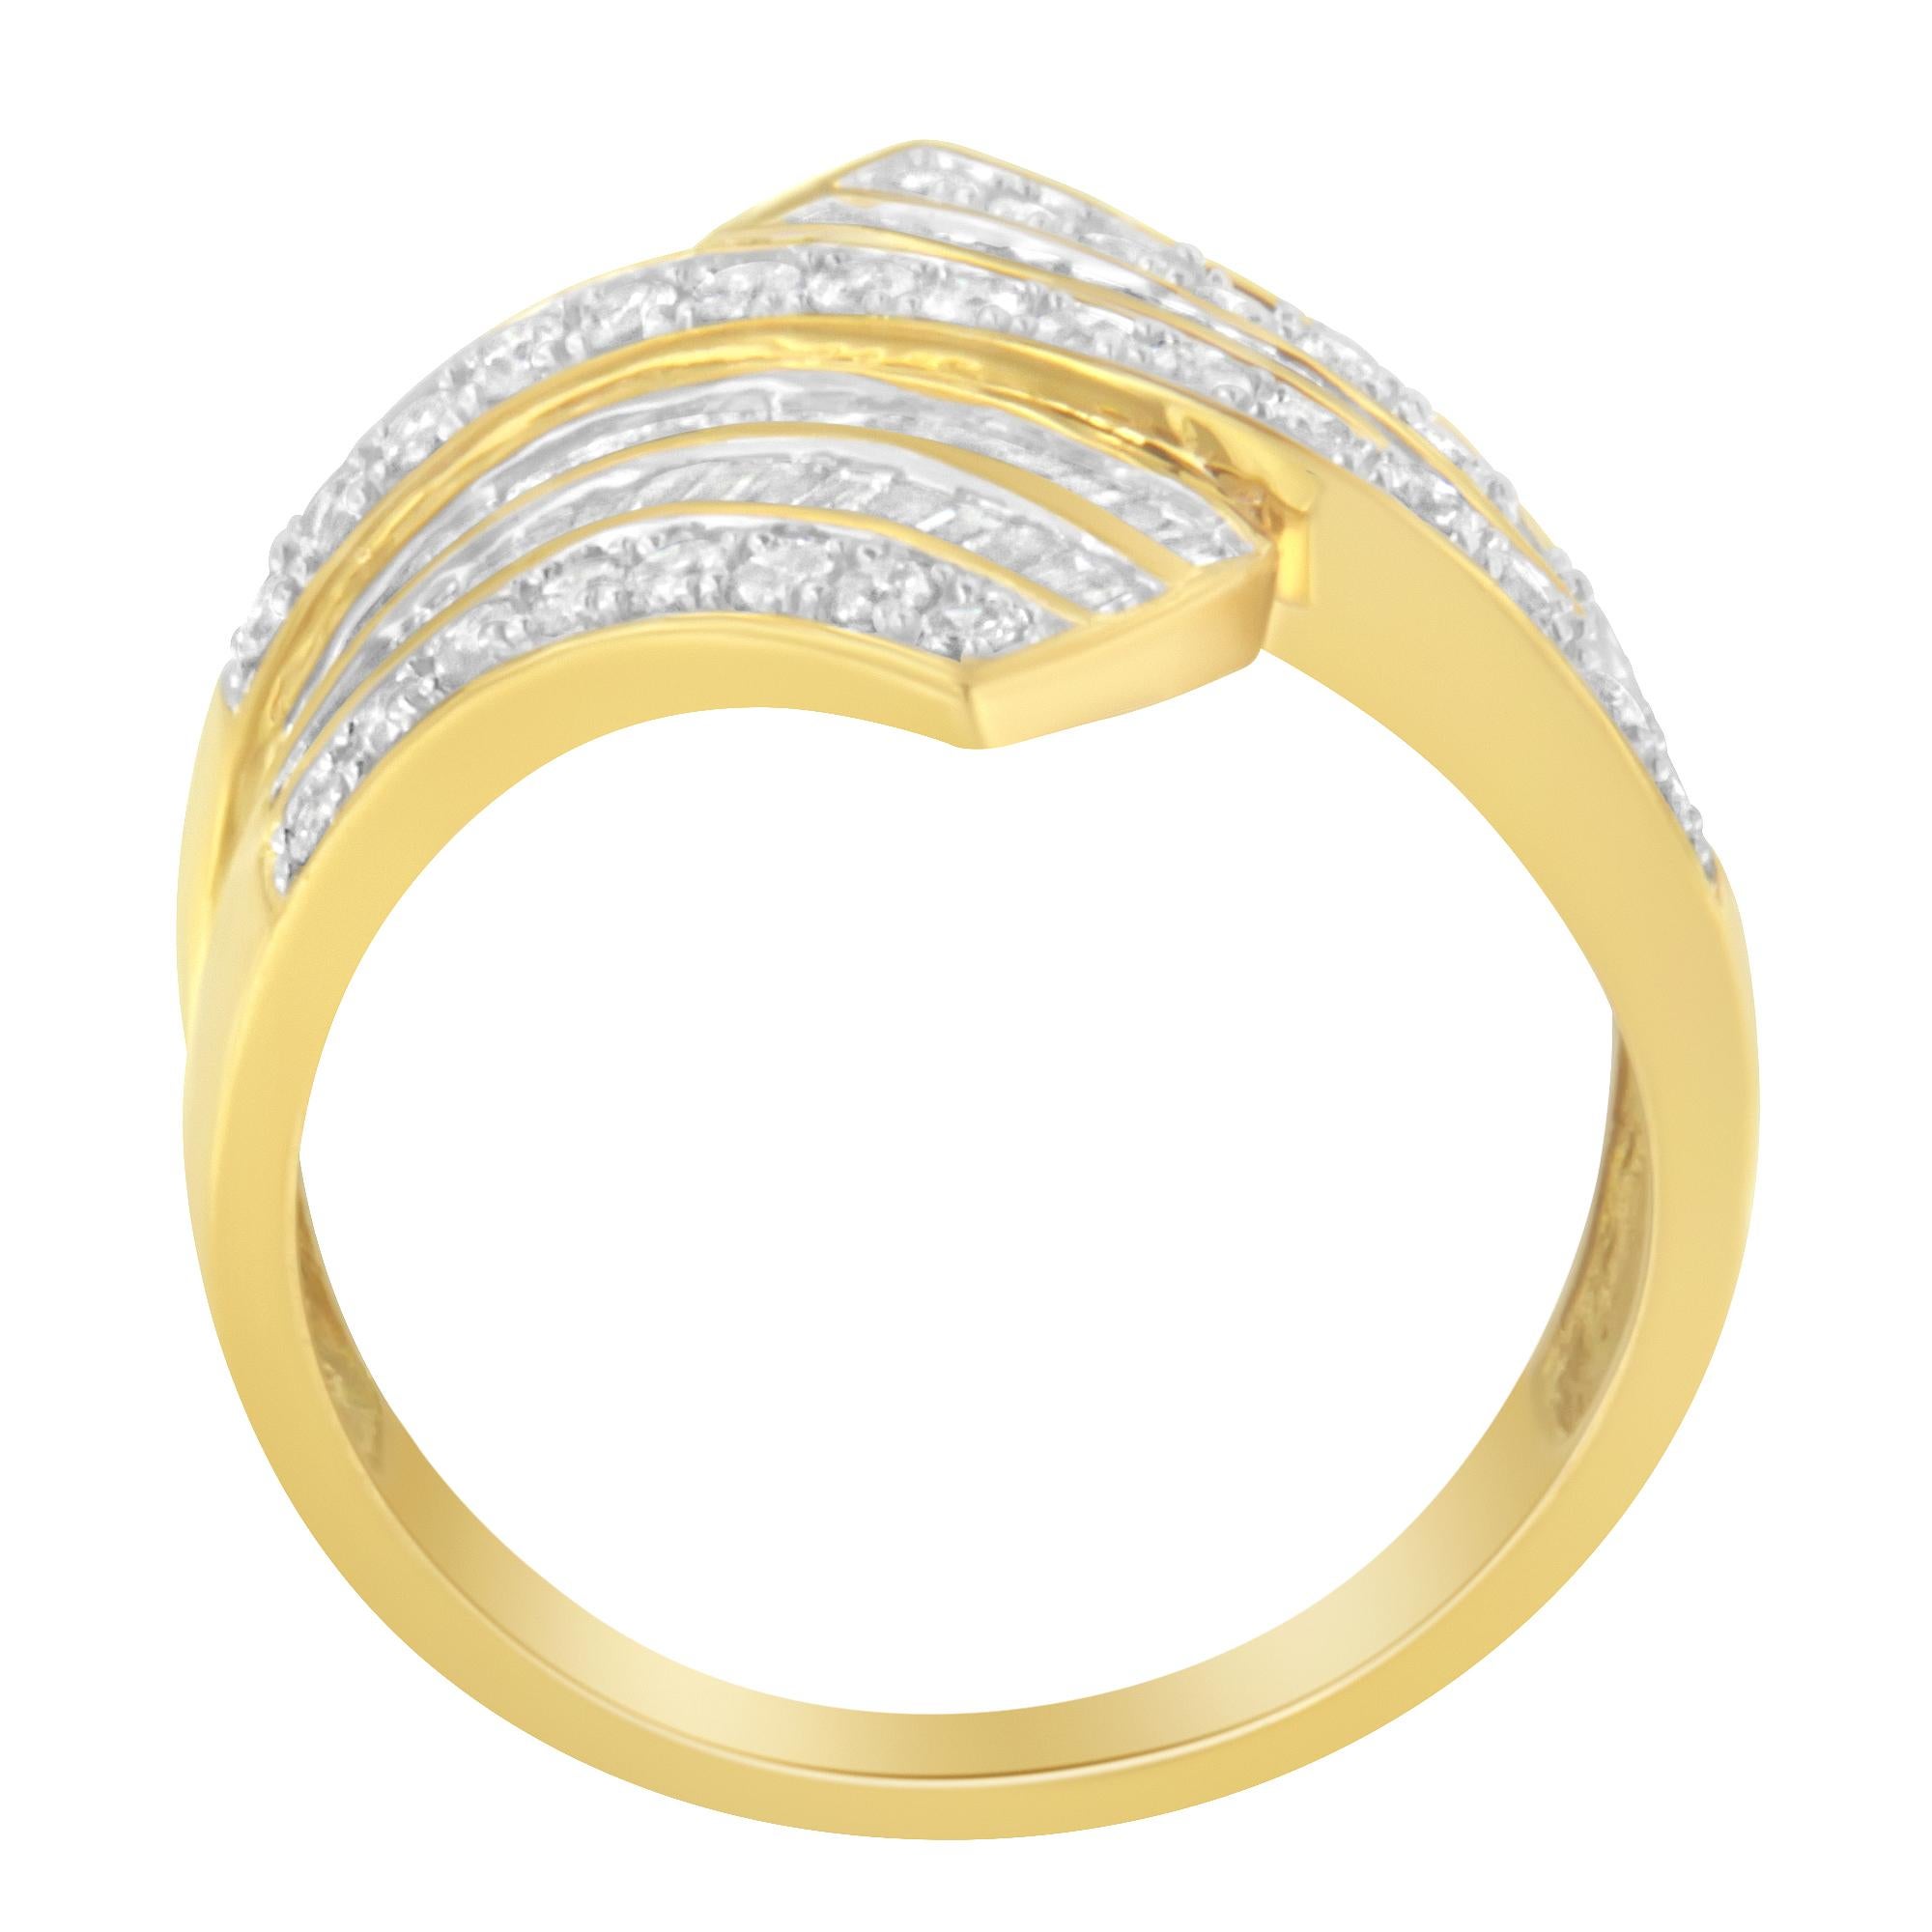 For Sale:  10K Yellow Gold 1 1/7 Carat Diamond Bypass Ring 2